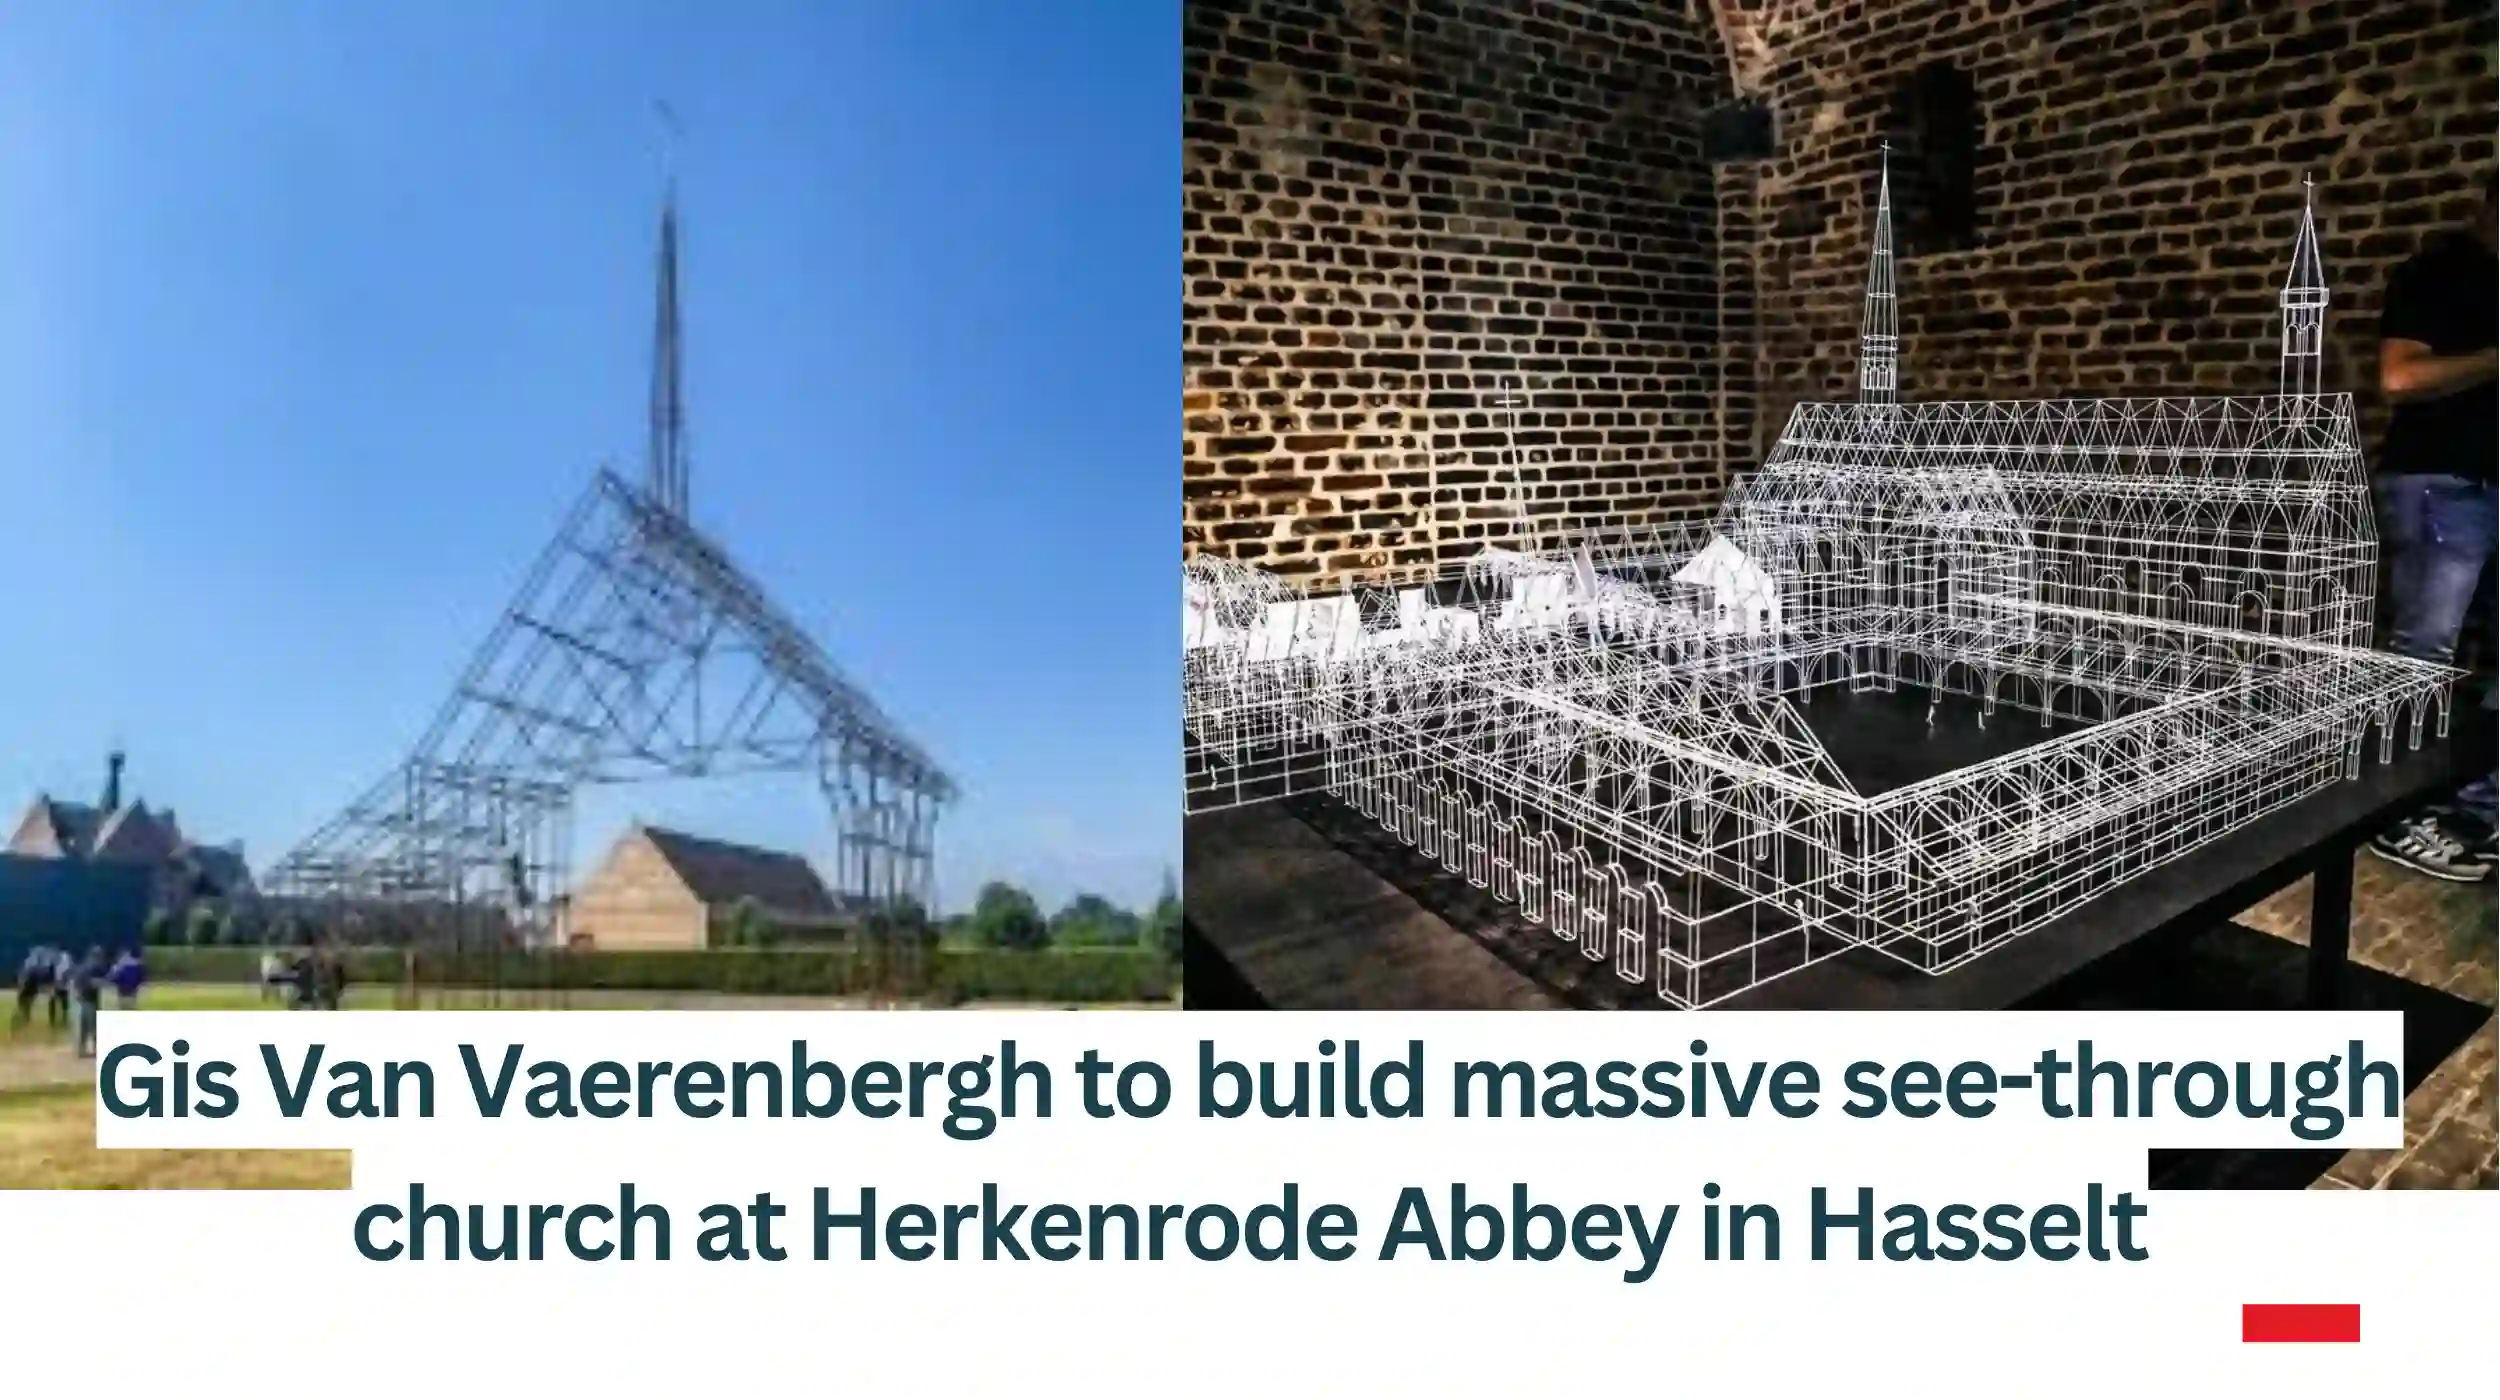 Gis-Van-Vaerenbergh-to-build-massive-see-through-church-at-Herkenrode-Abbey-in-Hasselt.